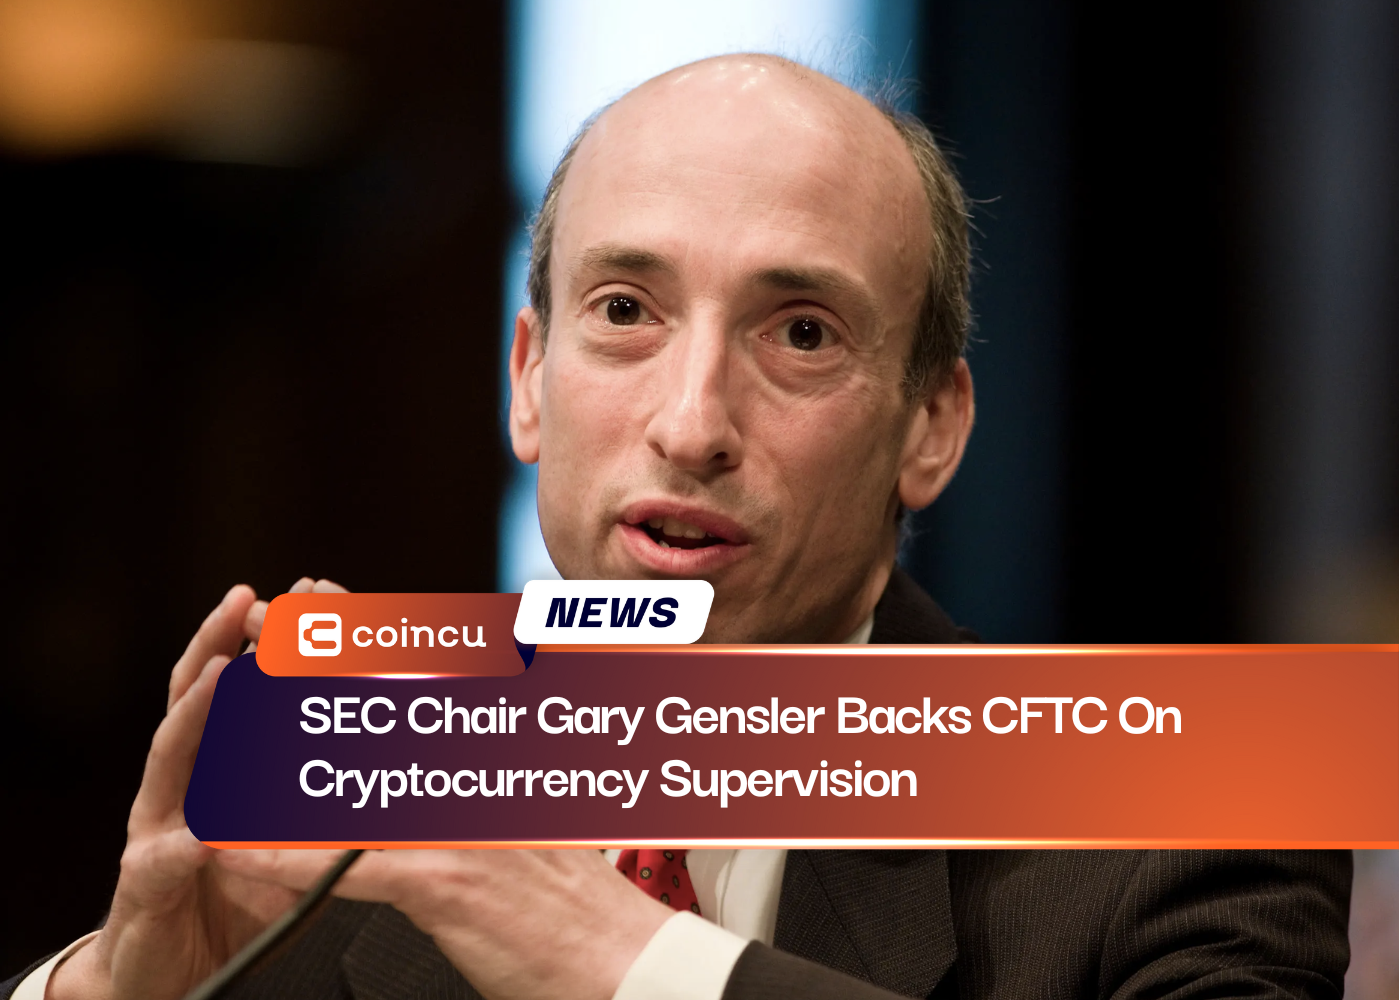 SEC Chair Gary Gensler Backs CFTC On Cryptocurrency Supervision